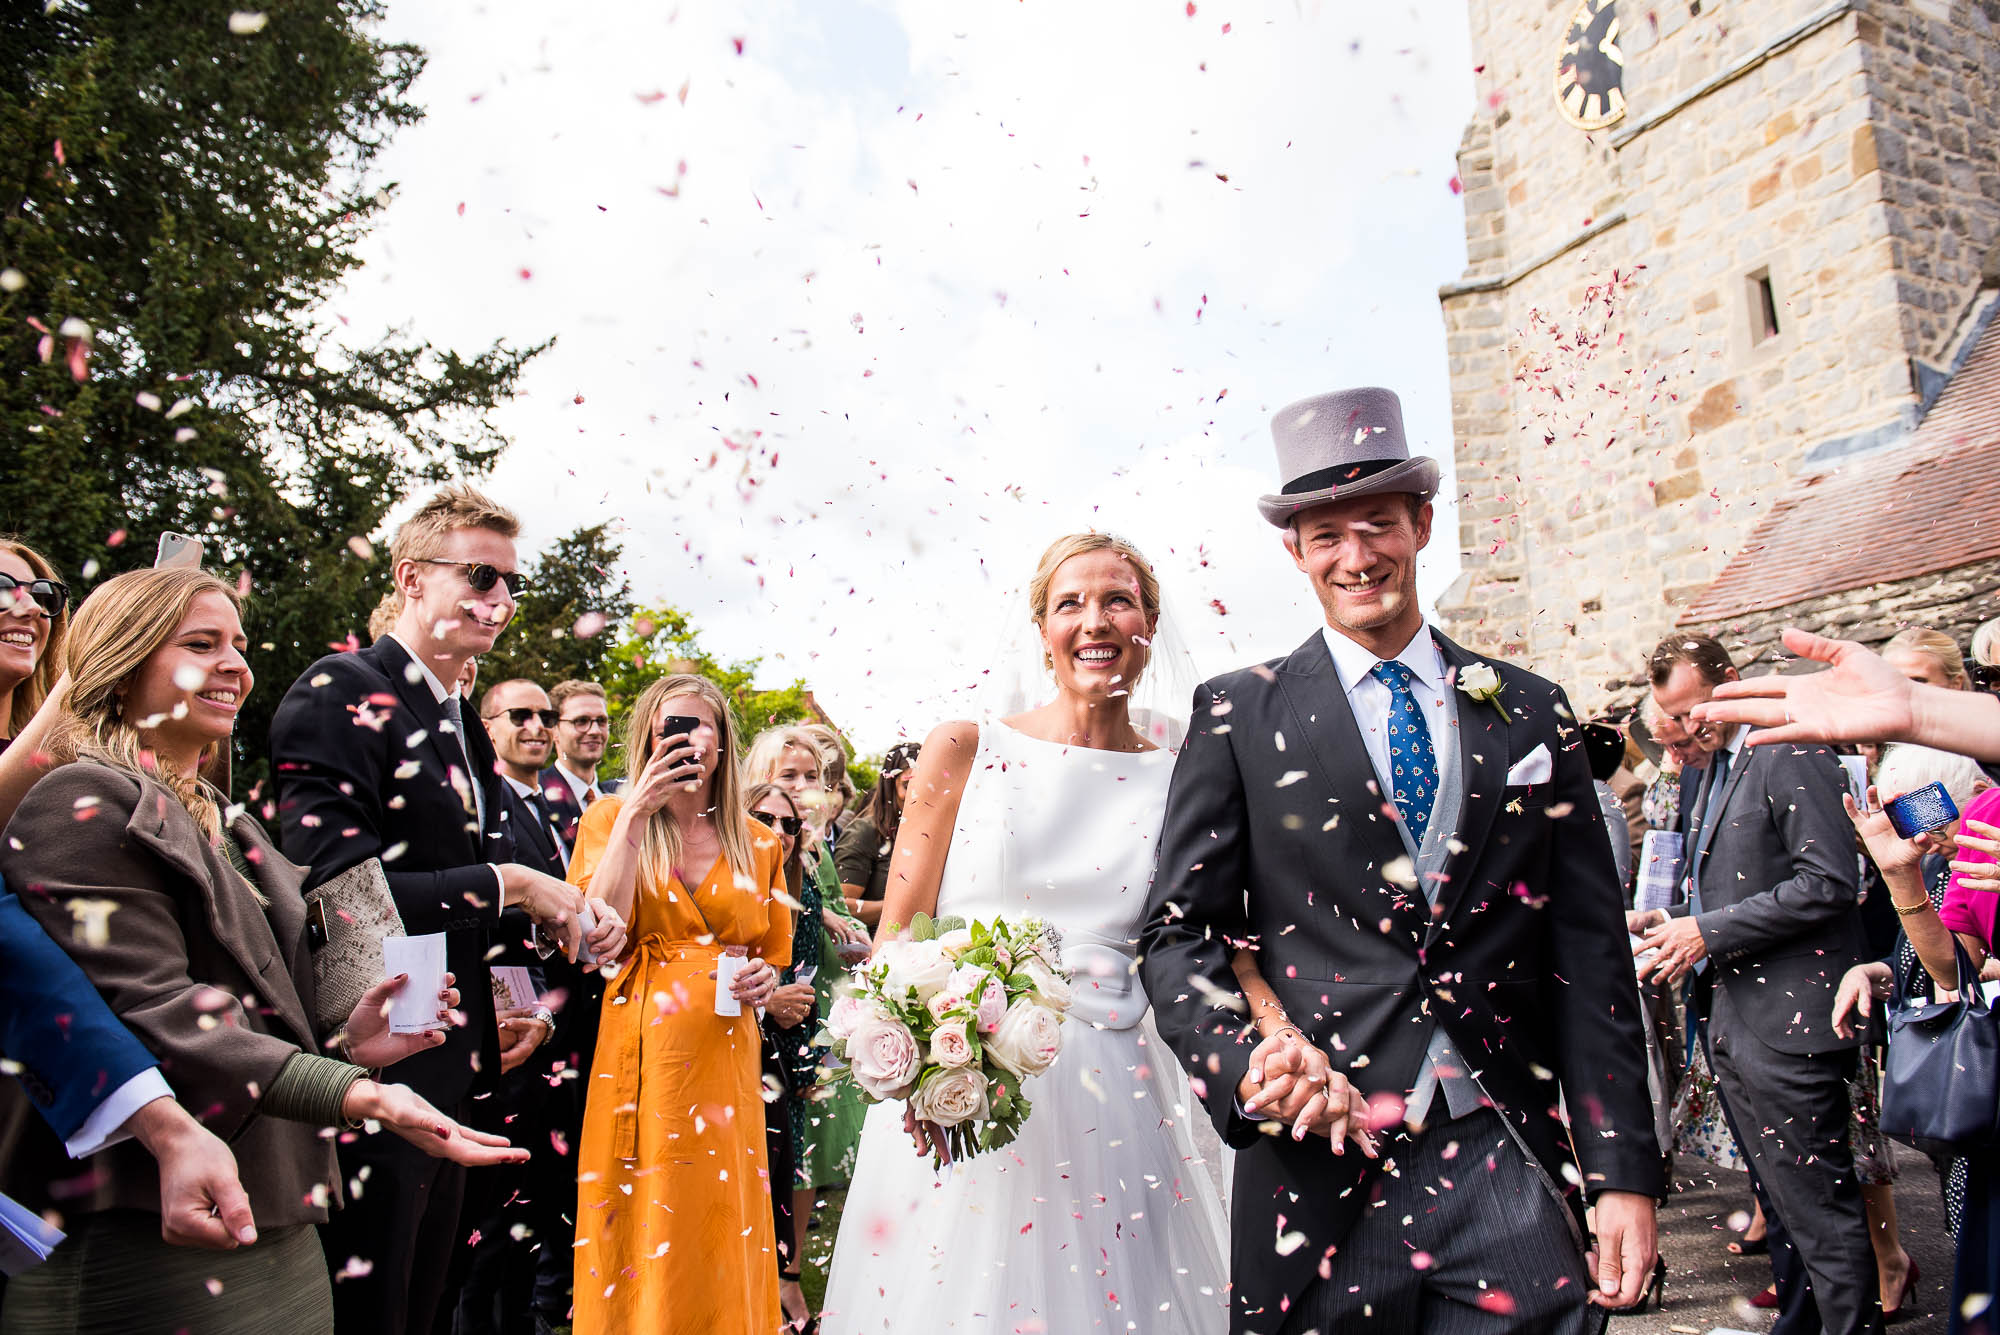 Outdoor Wedding Photography Surrey, Stunning Scandinavian Couple Smiling as They Walk Down The Confetti Line